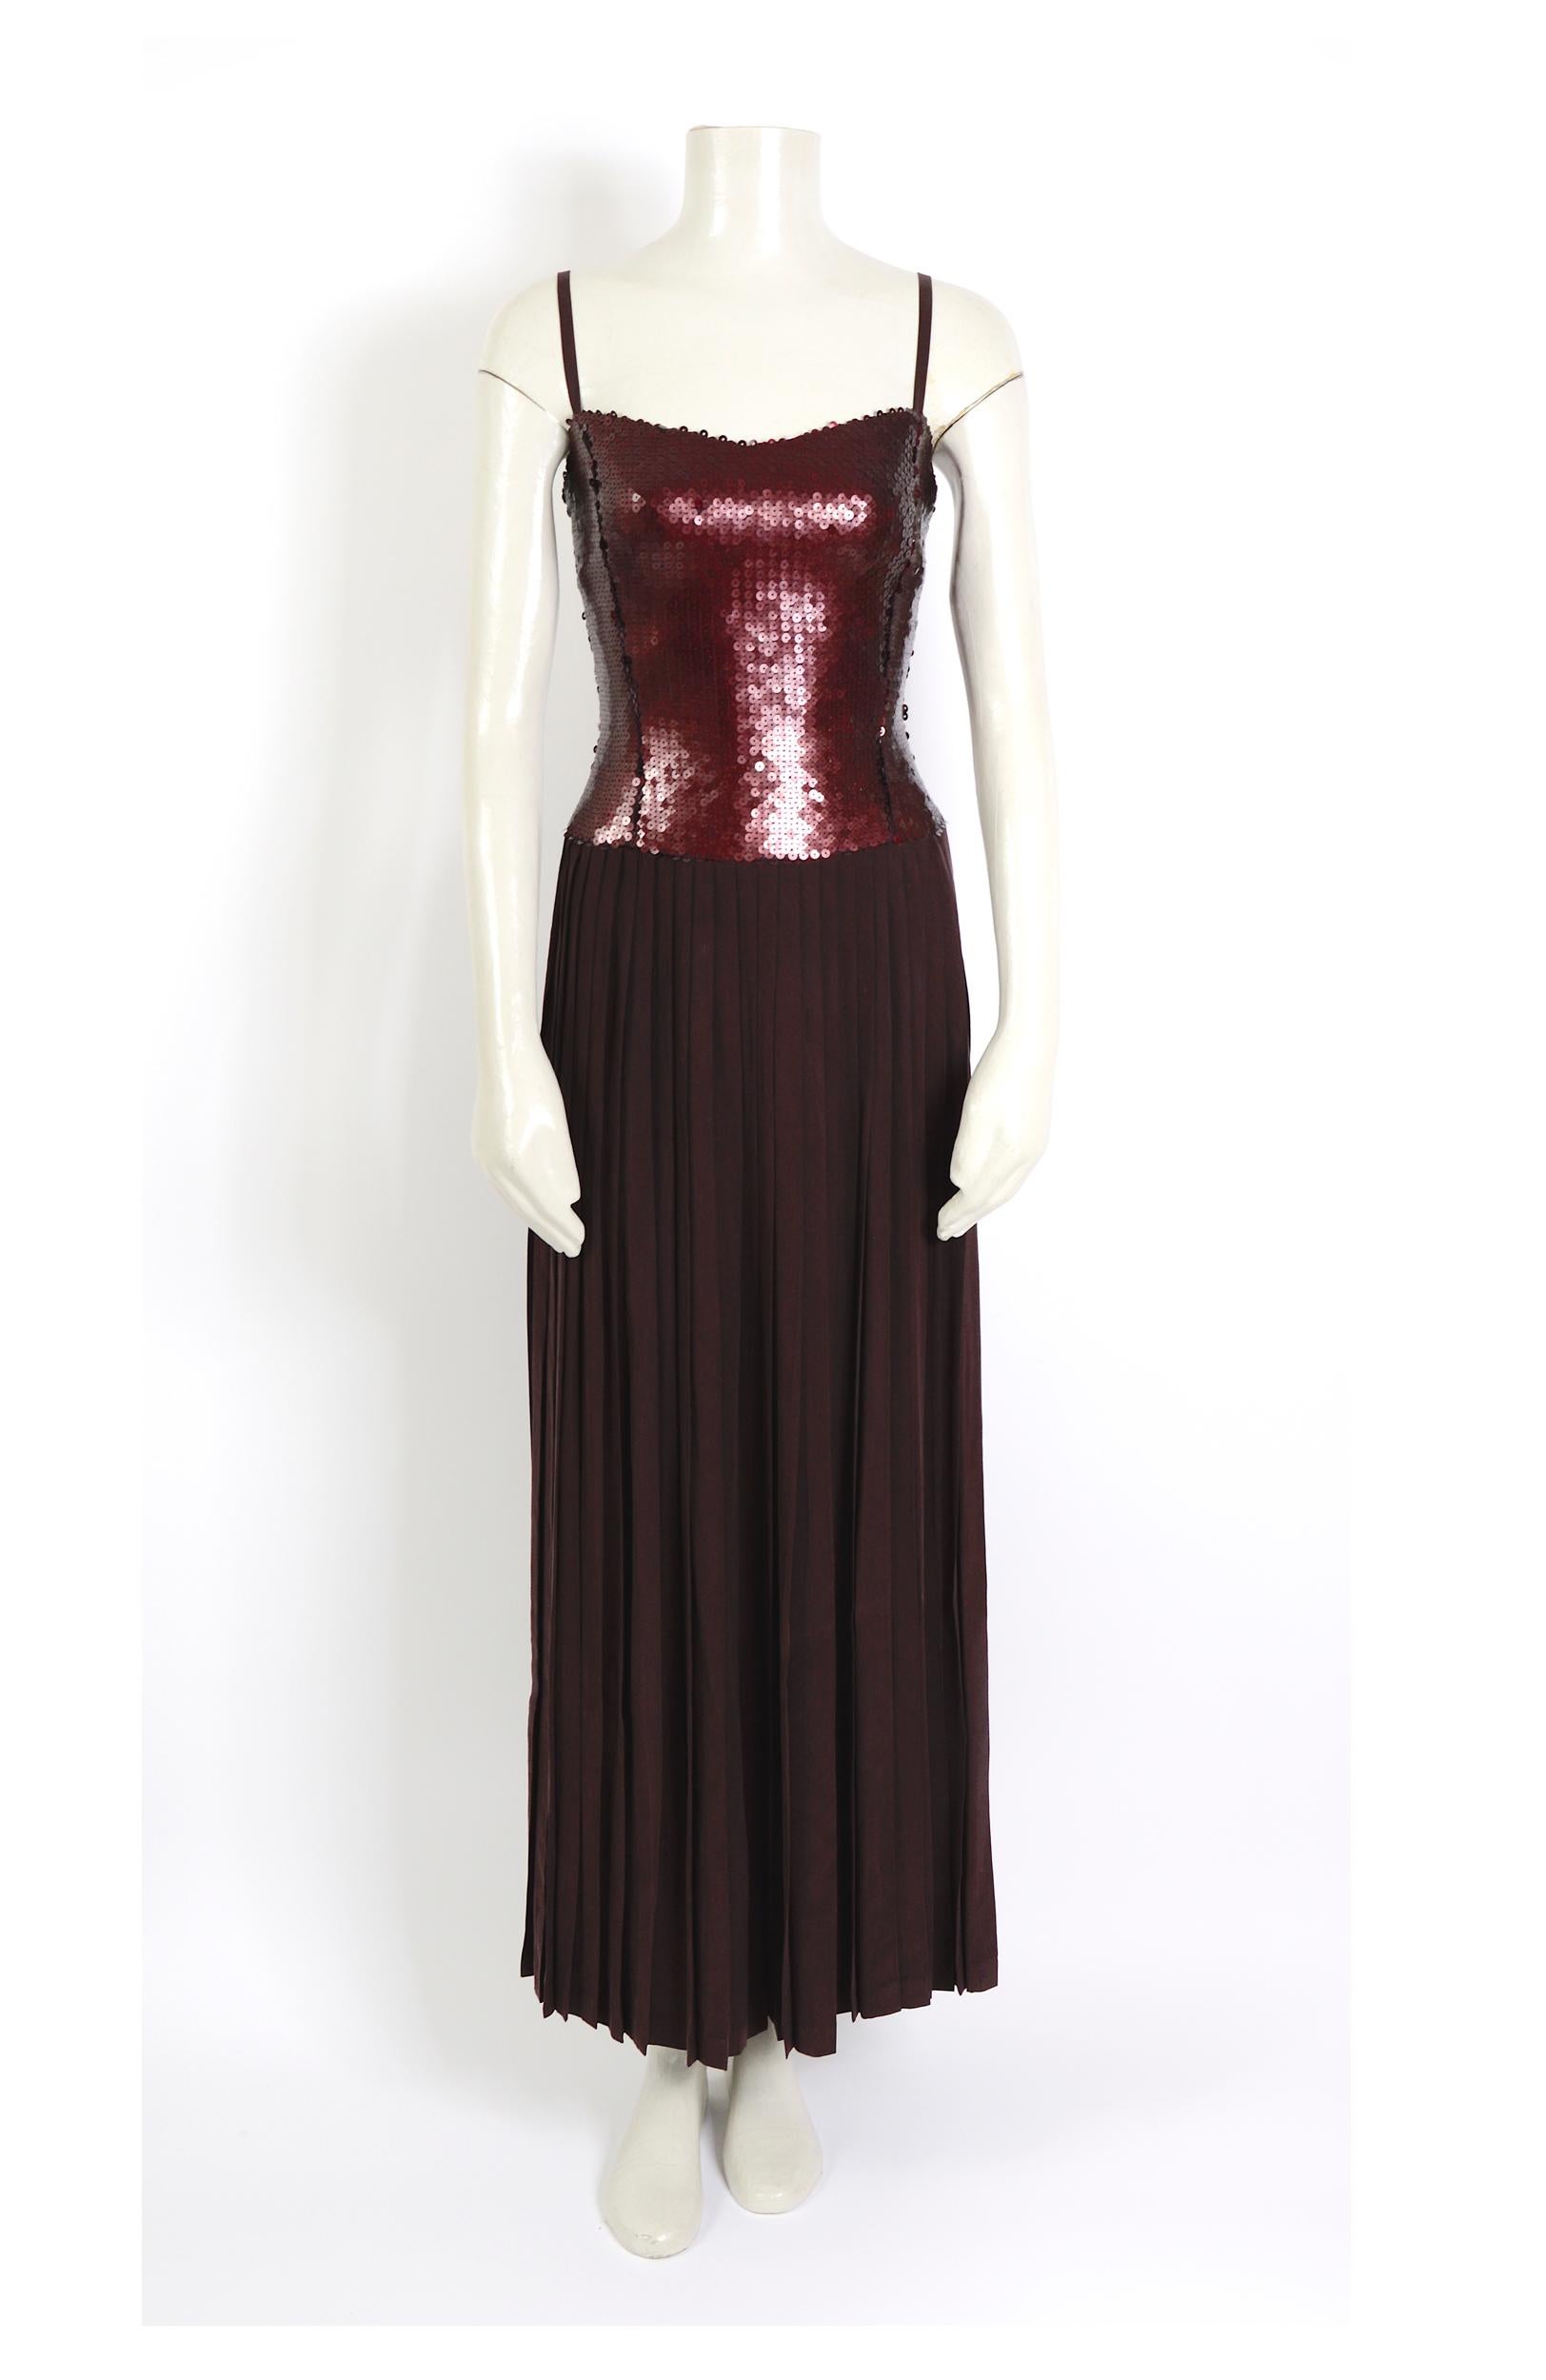 Beautiful timeless dress by Lanvin made in 100% silk 
French size 36.
In excellent condition with no missing sequins. 
The sequin upper bodice is lined, and the pleated lower part of the dress is unlined. 
Measurements that are taken flat:
Ua to Ua